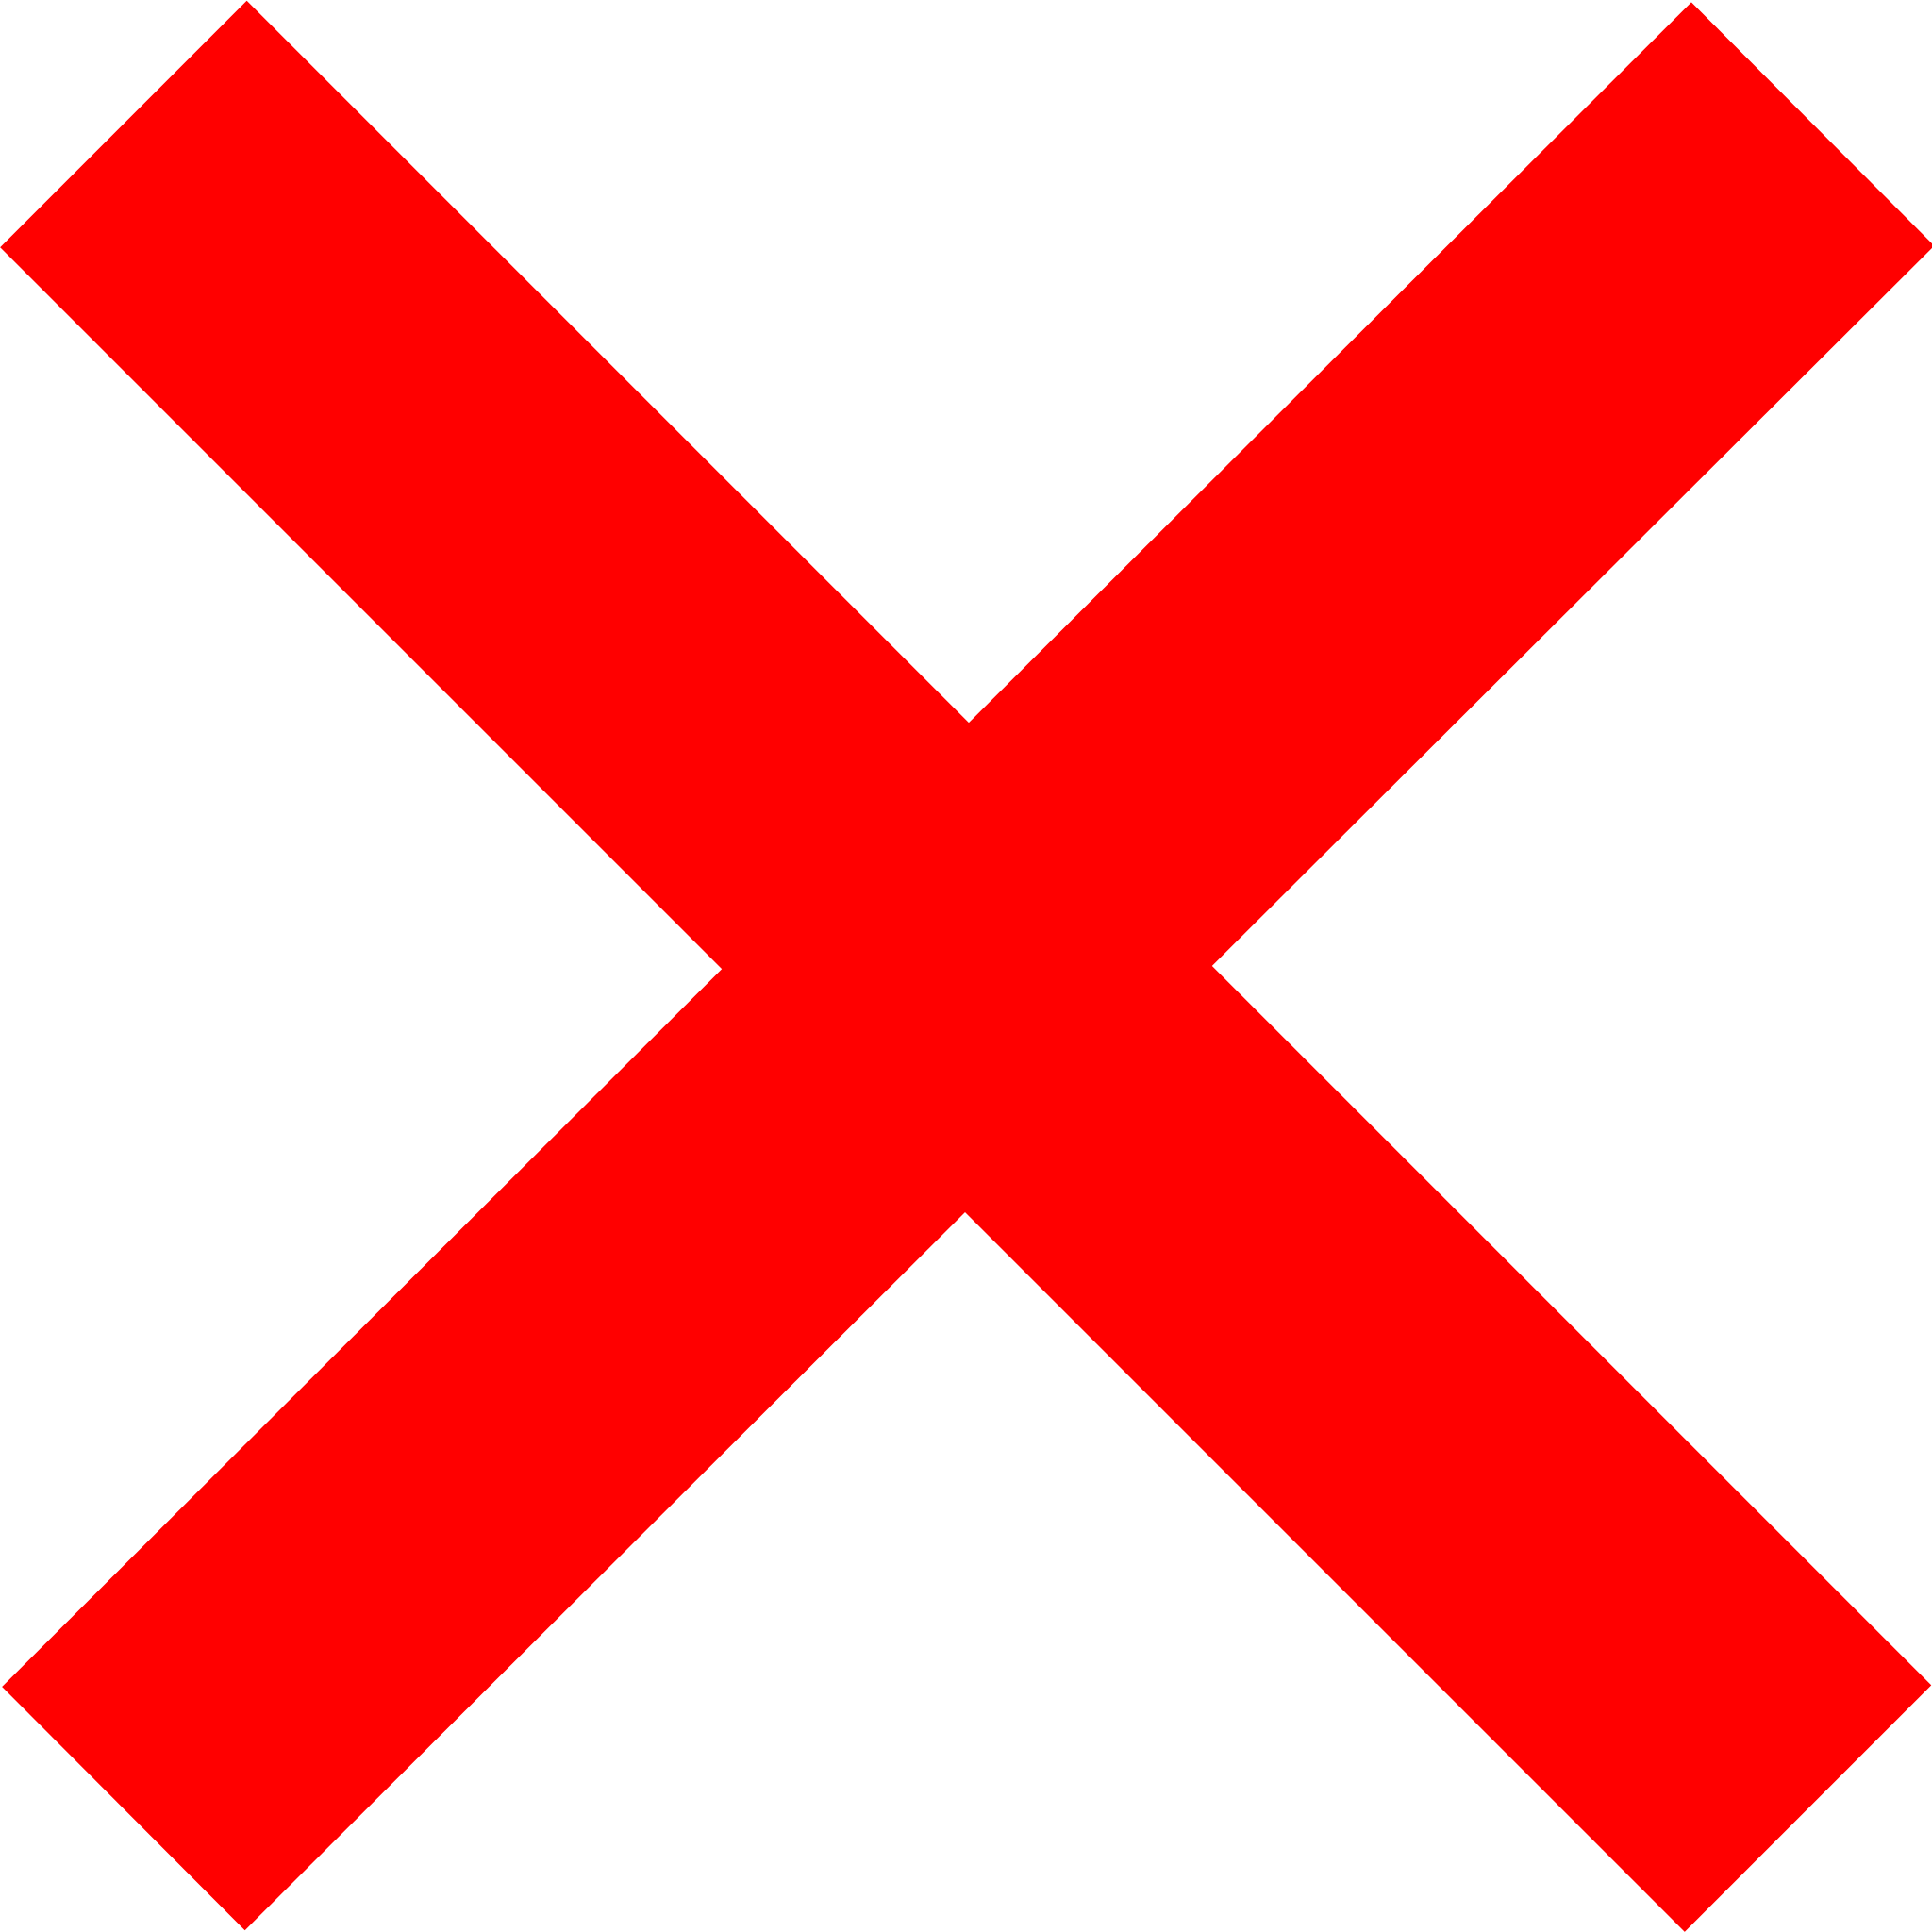 Image showing a file with a red X mark